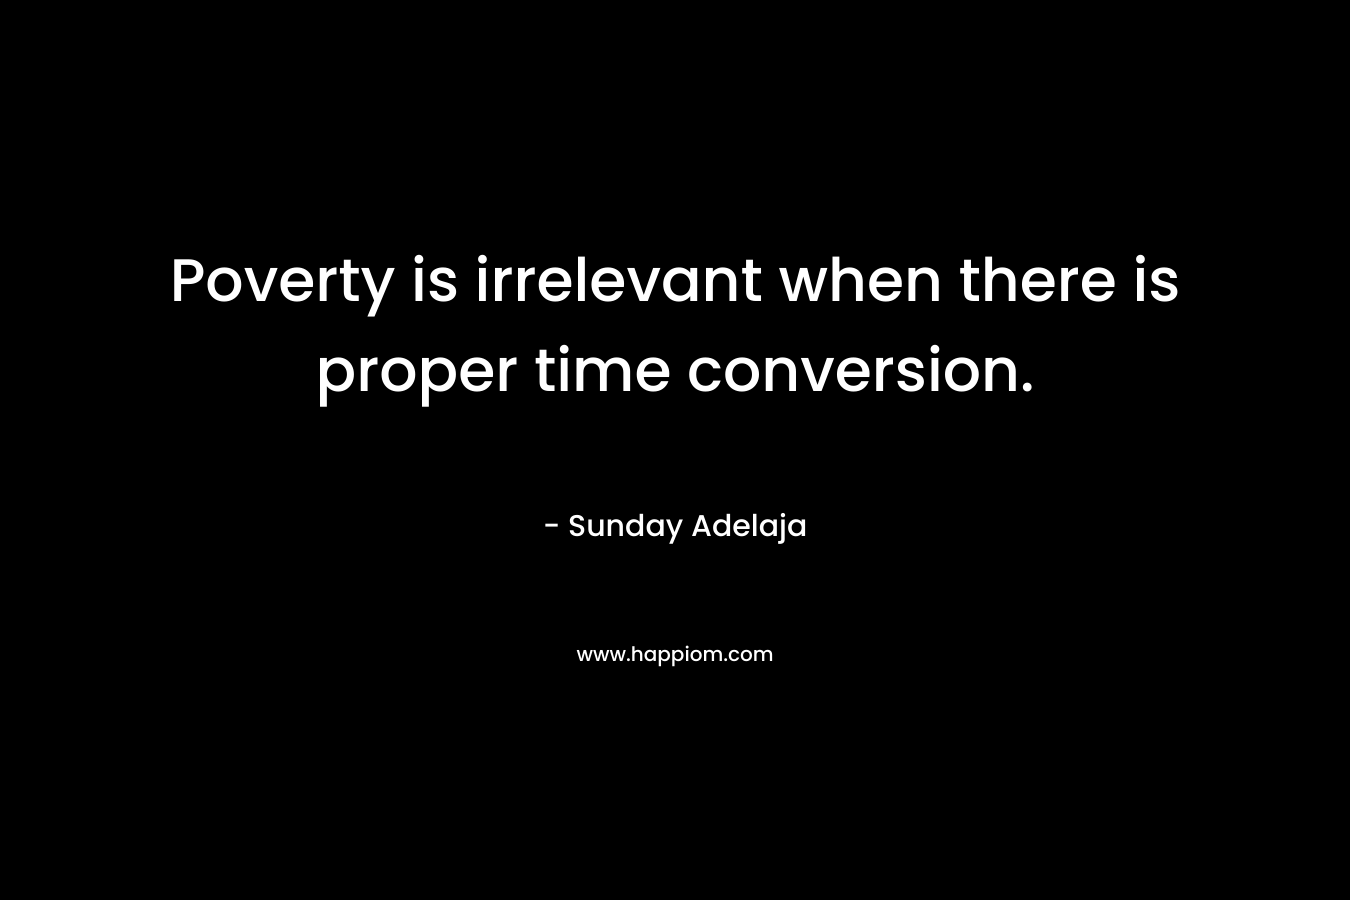 Poverty is irrelevant when there is proper time conversion.